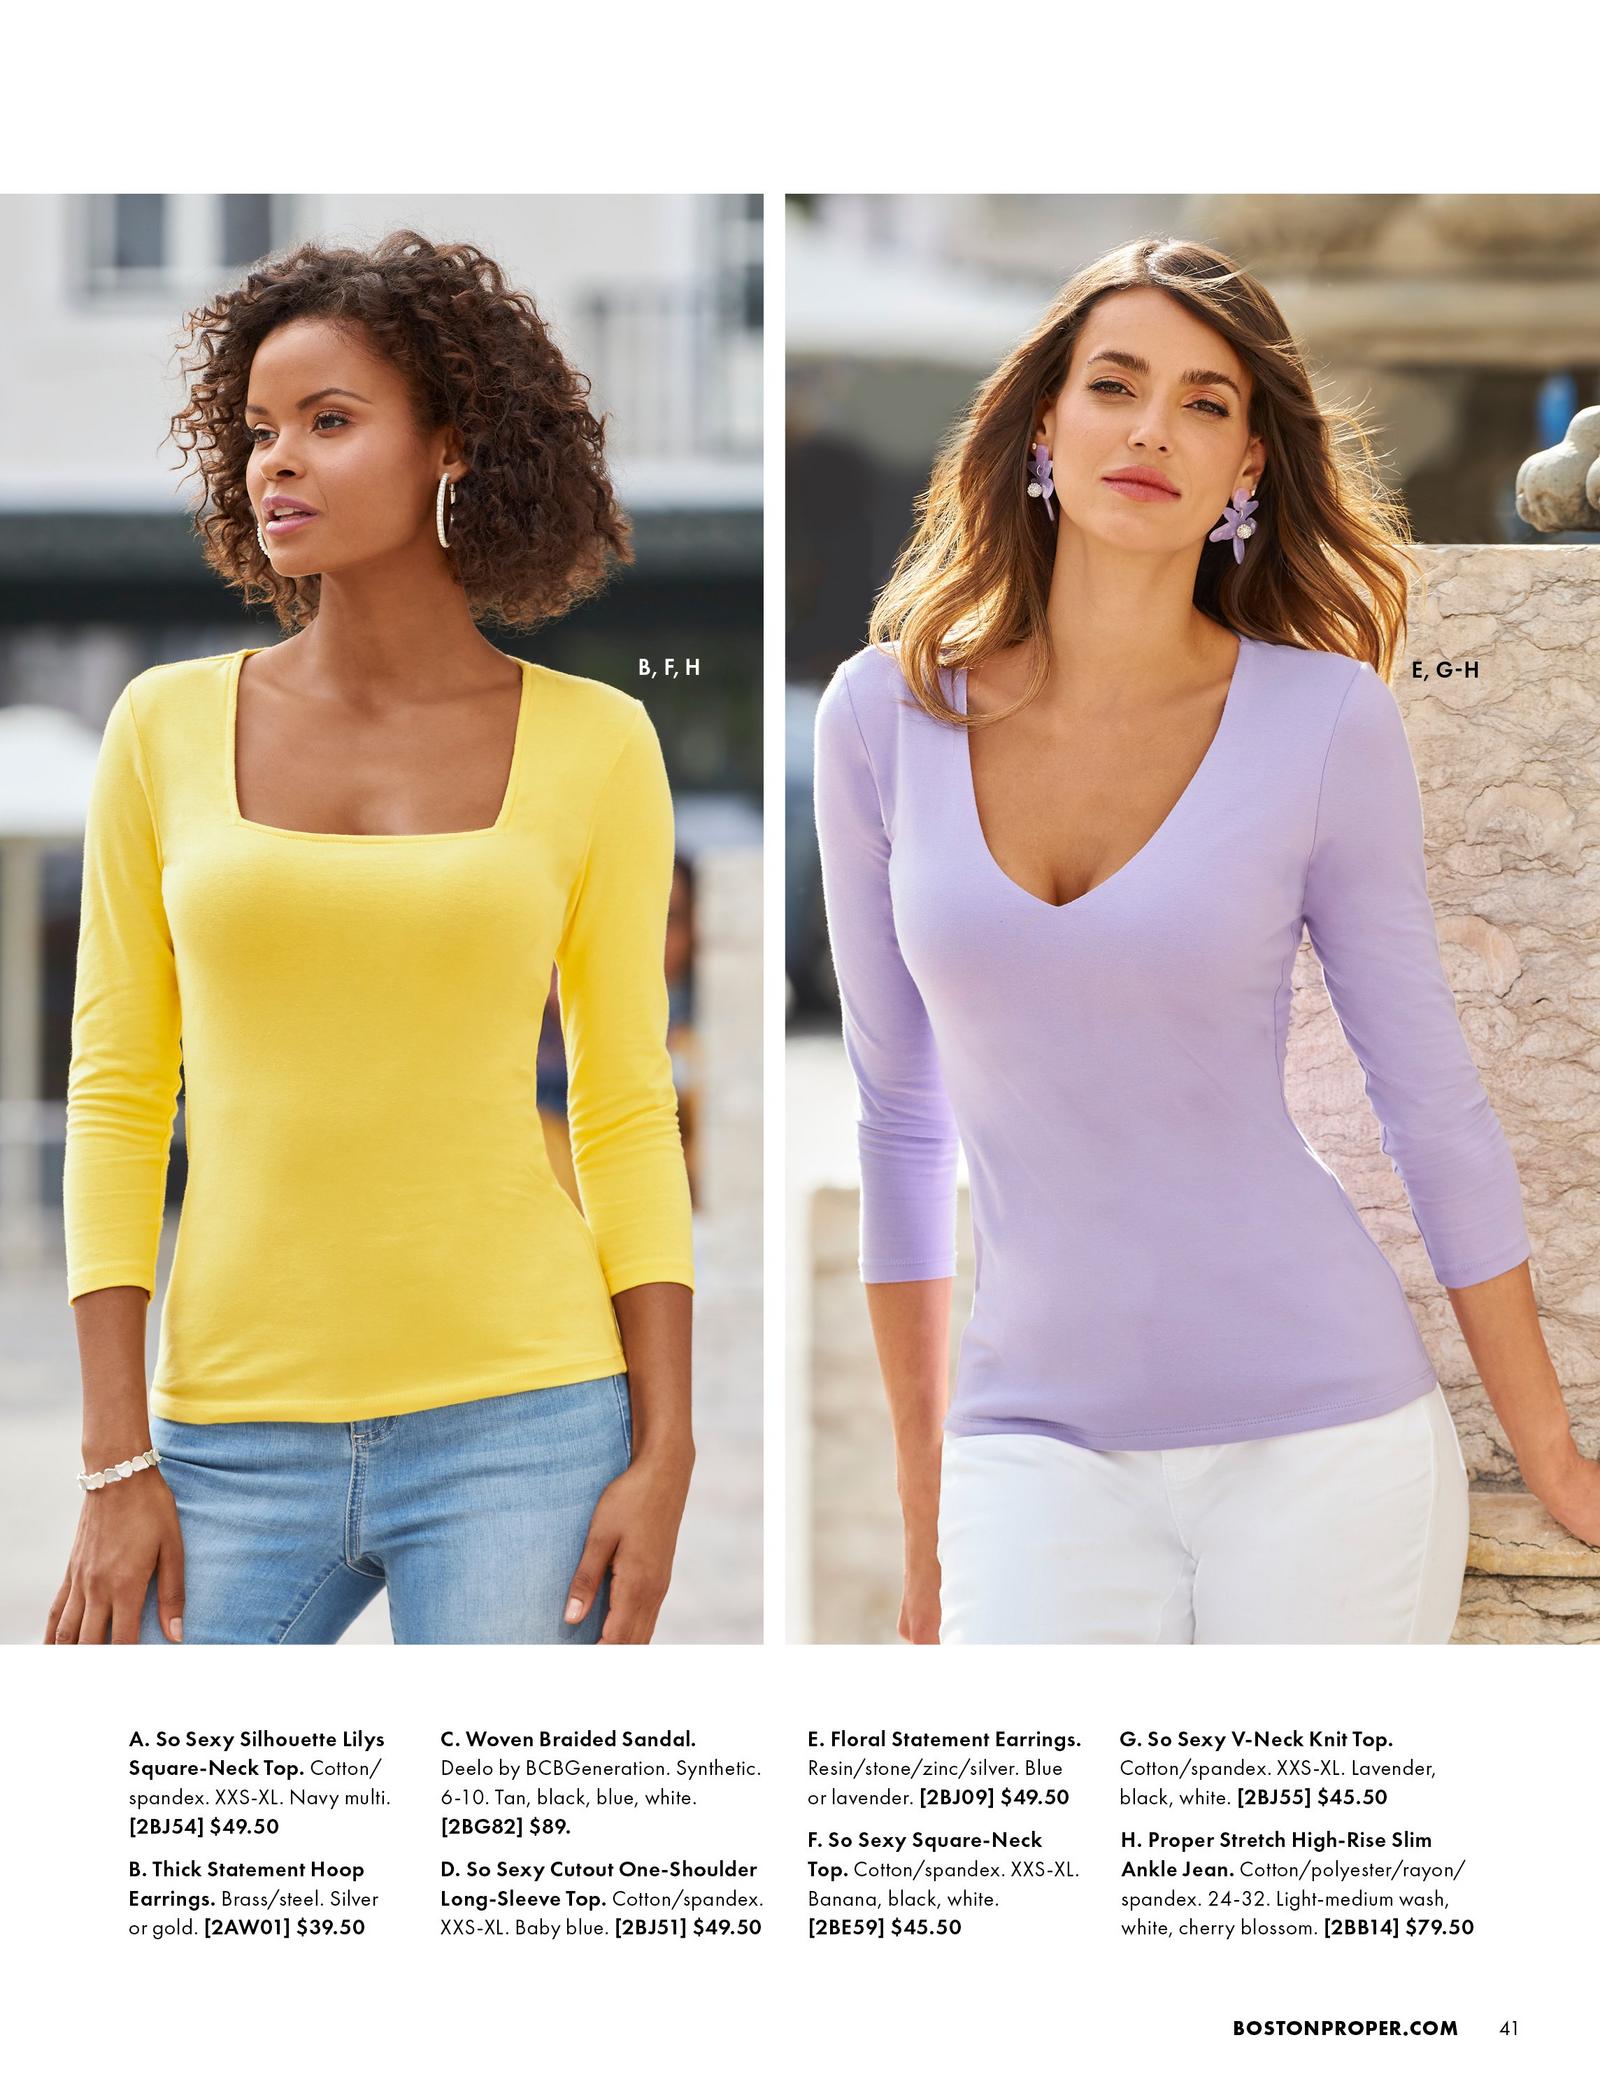 left model wearing a yellow square-neck long sleeve top and jeans. right model wearing a lavender v-neck long-sleeve top and white jeans.